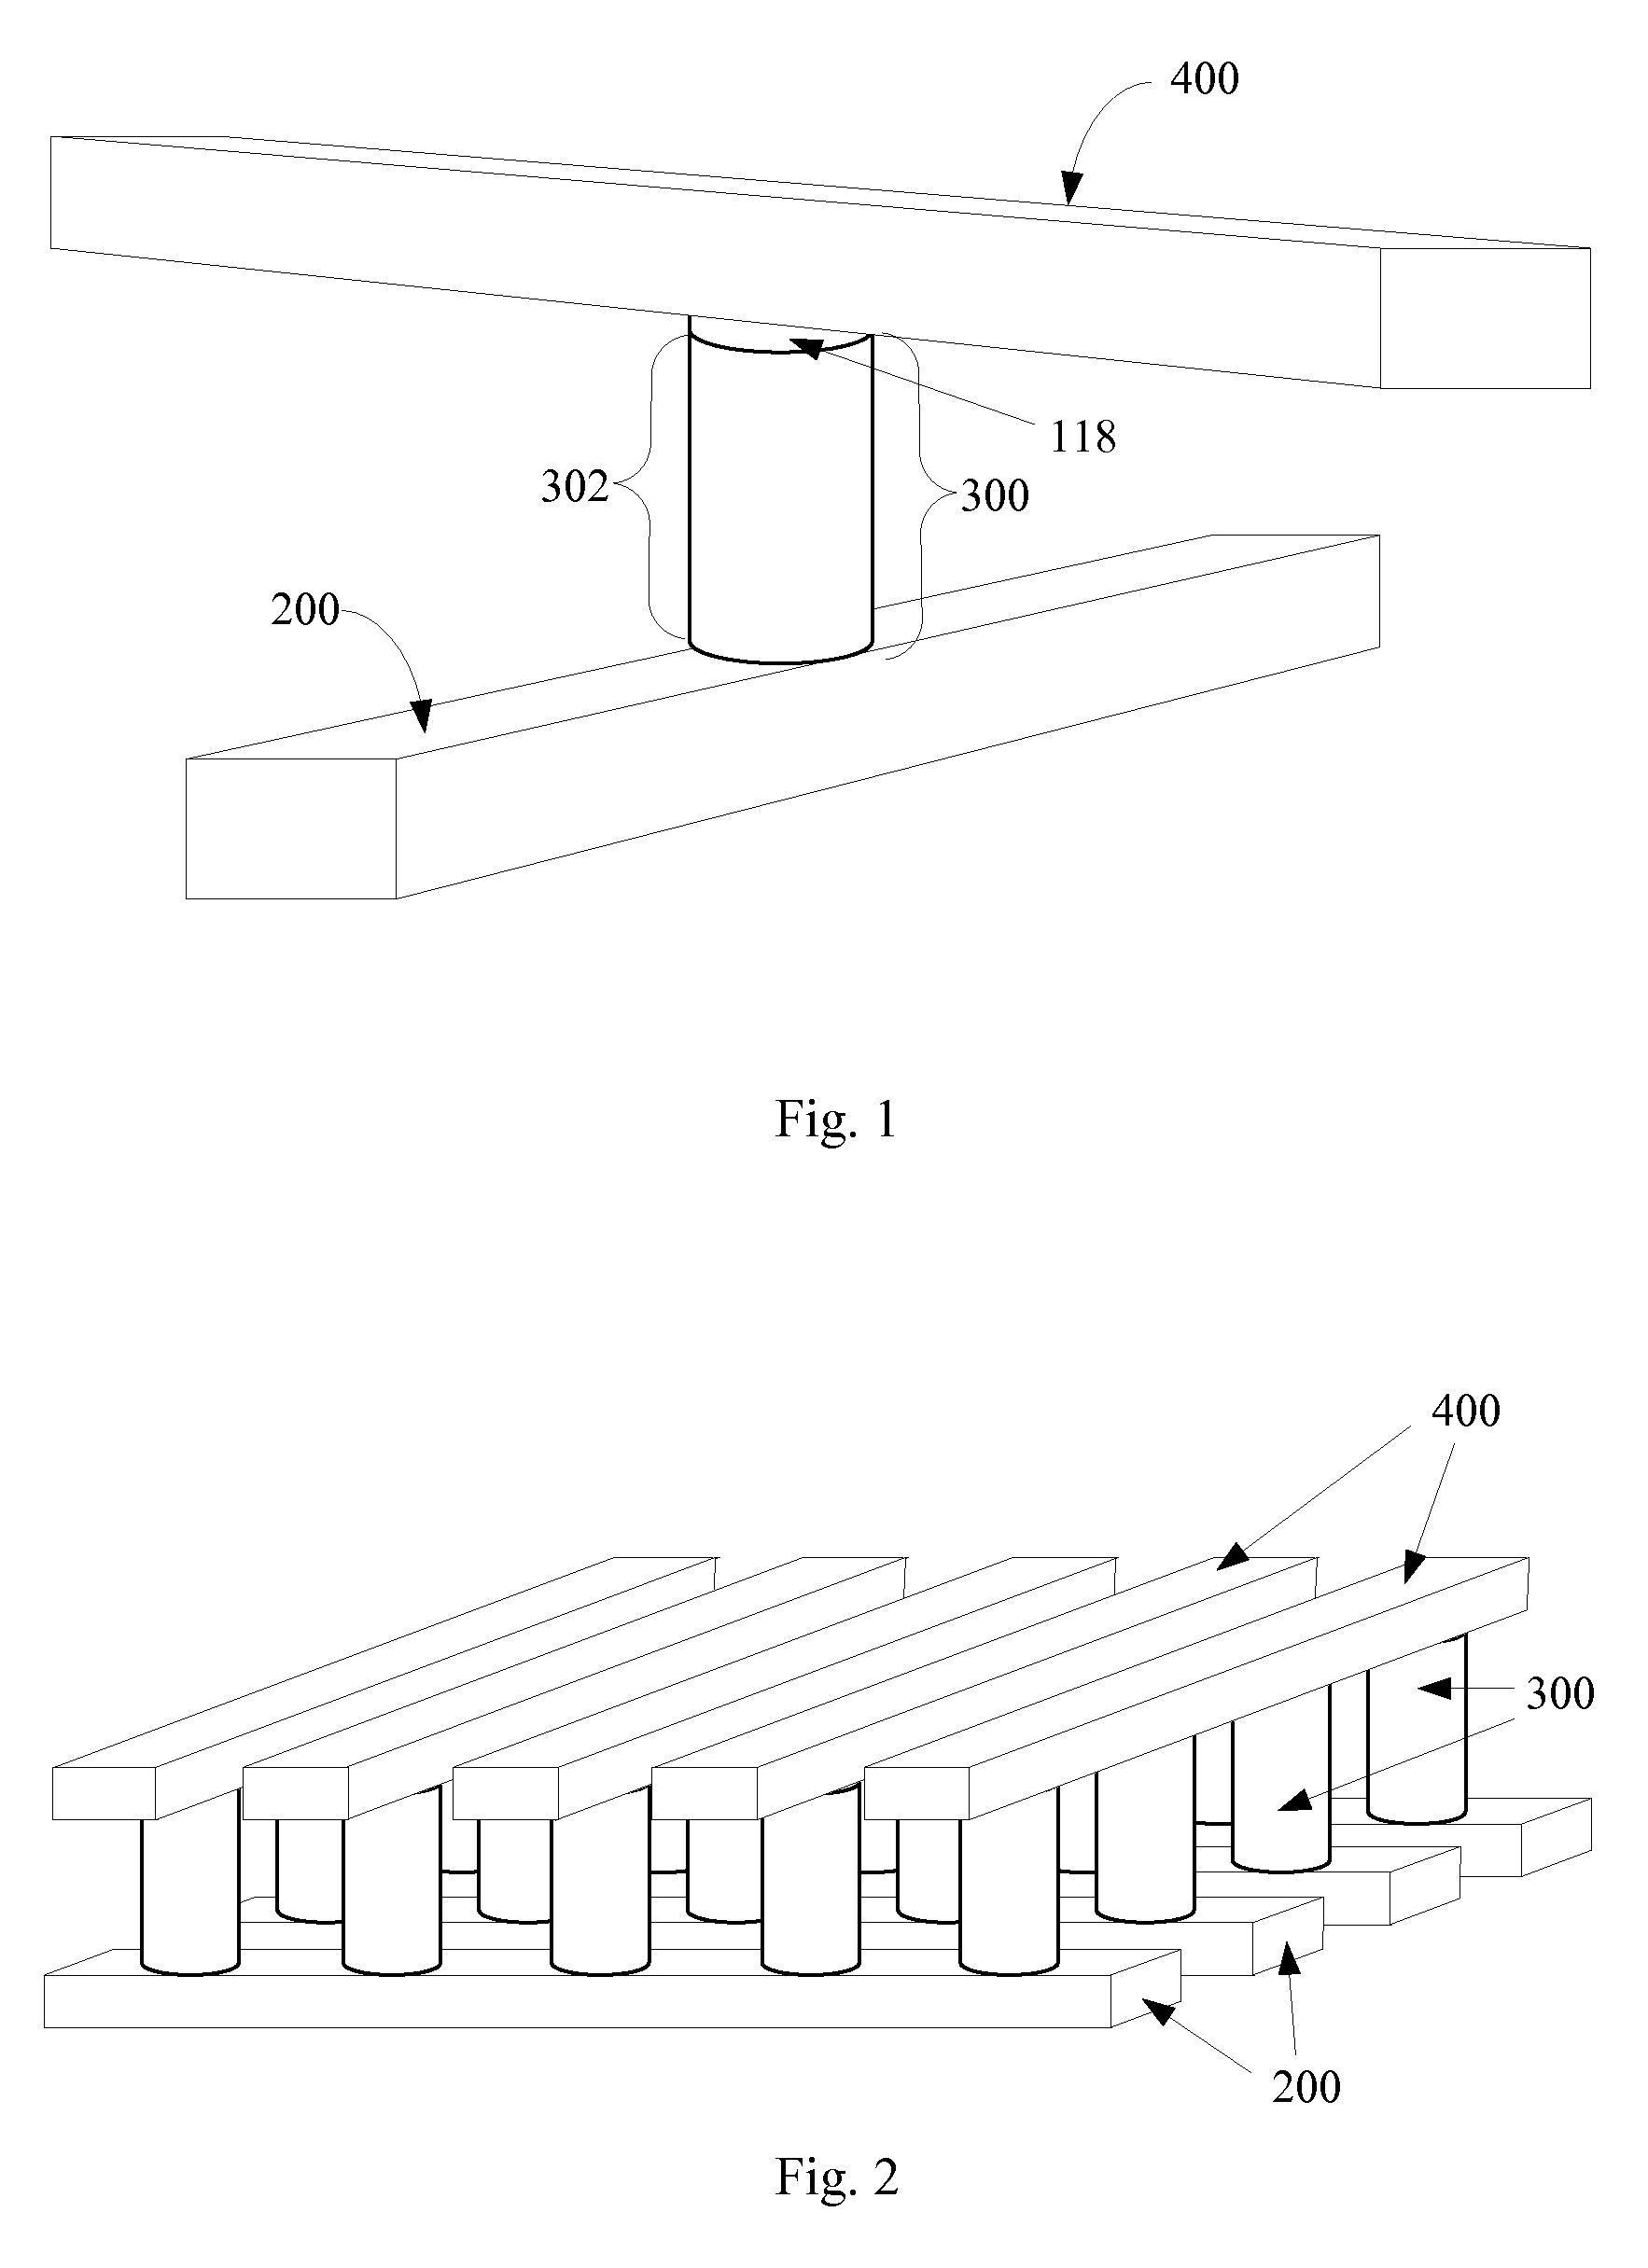 Large array of upward pointing p-i-n diodes having large and uniform current